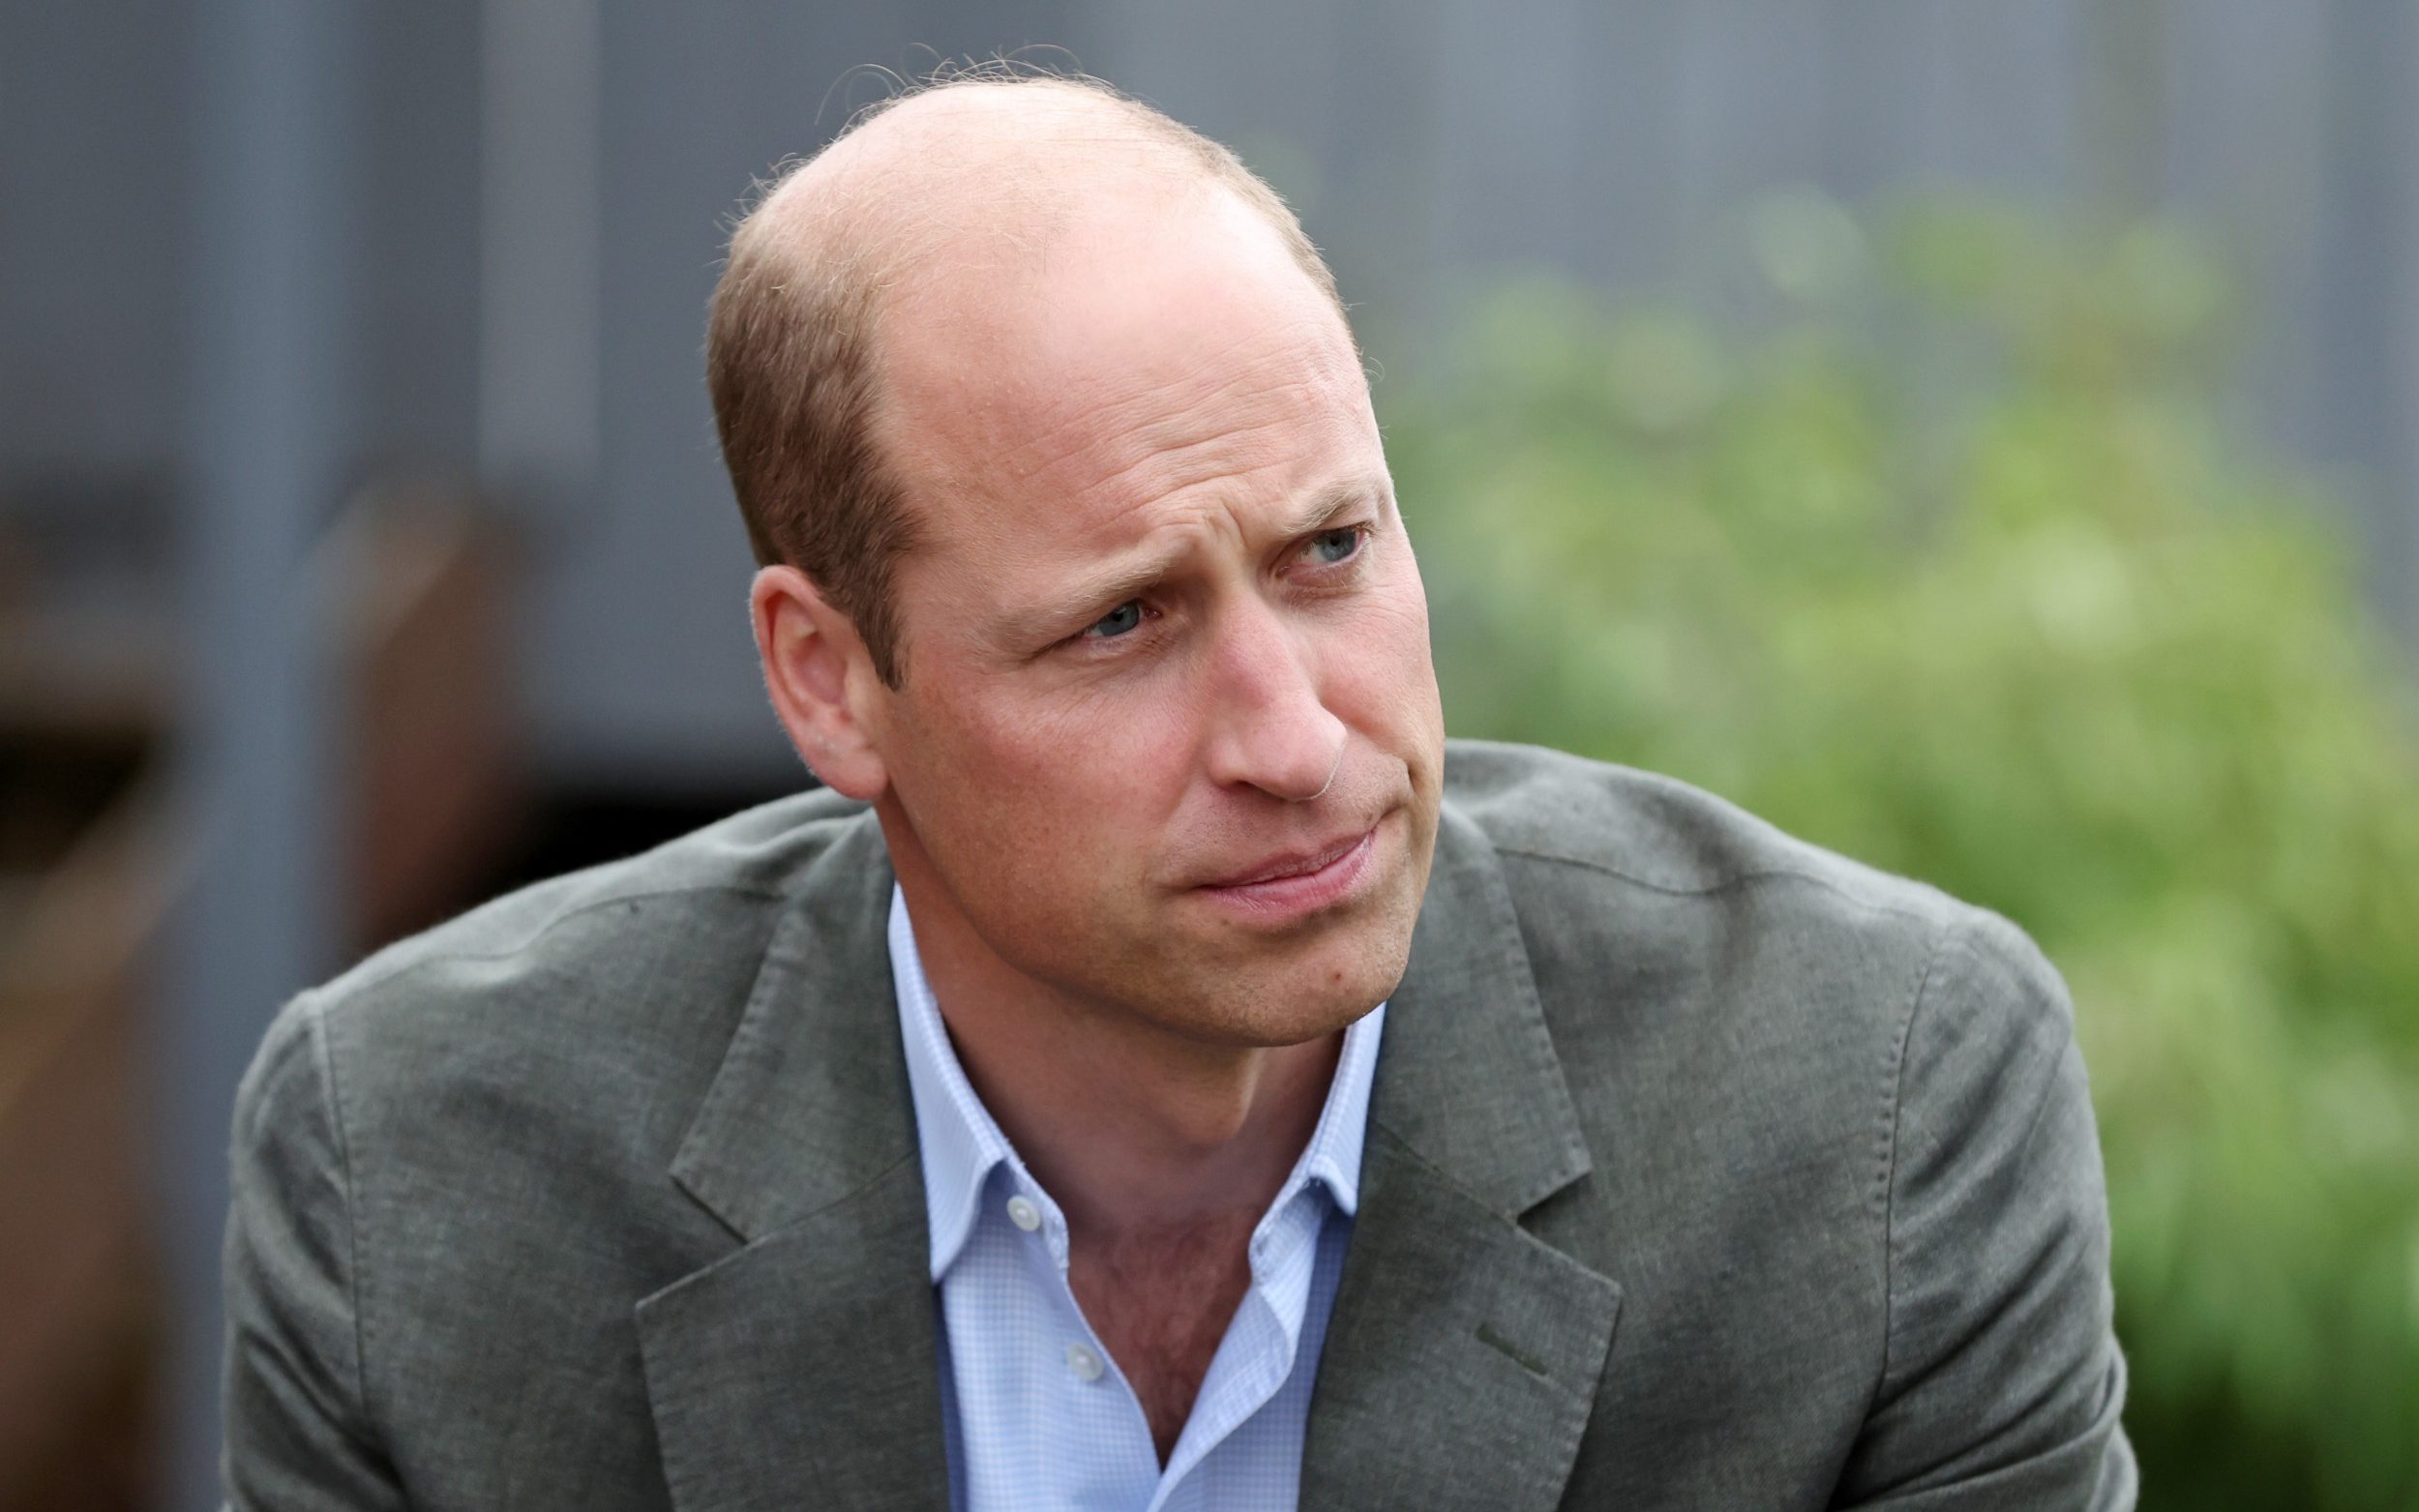 prince william to recognise ‘human suffering’ in gaza in first comments since conflict began